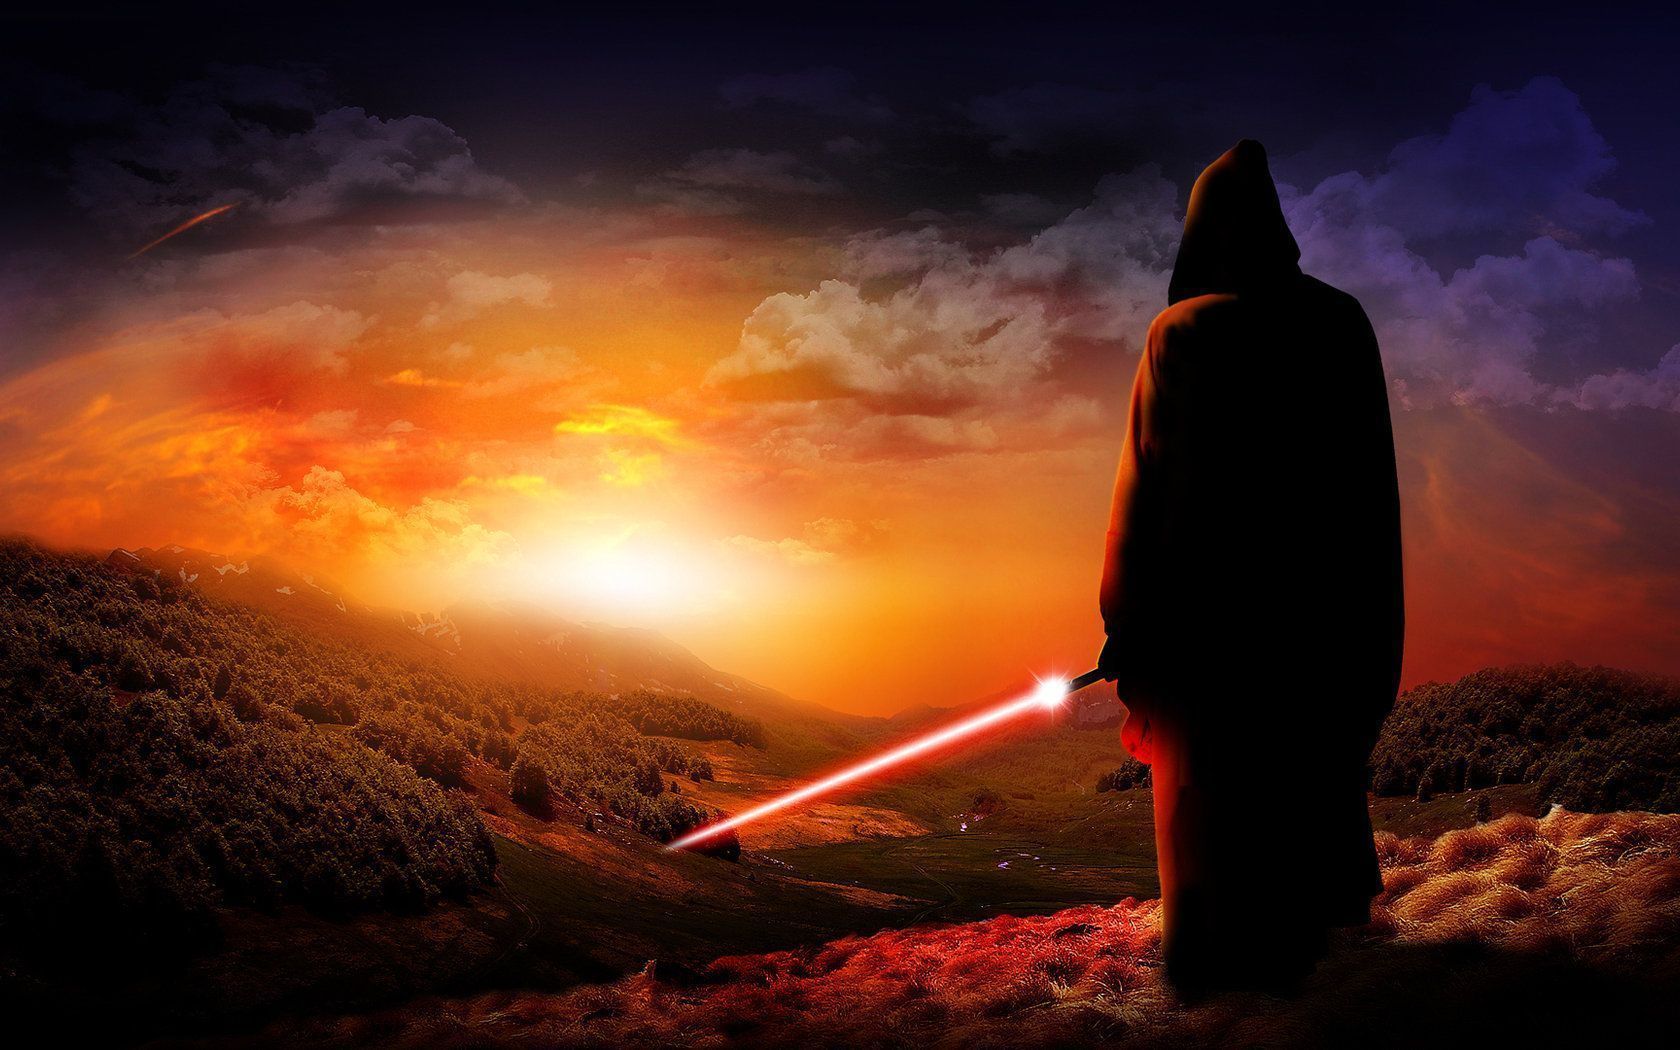 Wanderer with a light sword wallpapers and images - wallpapers ...